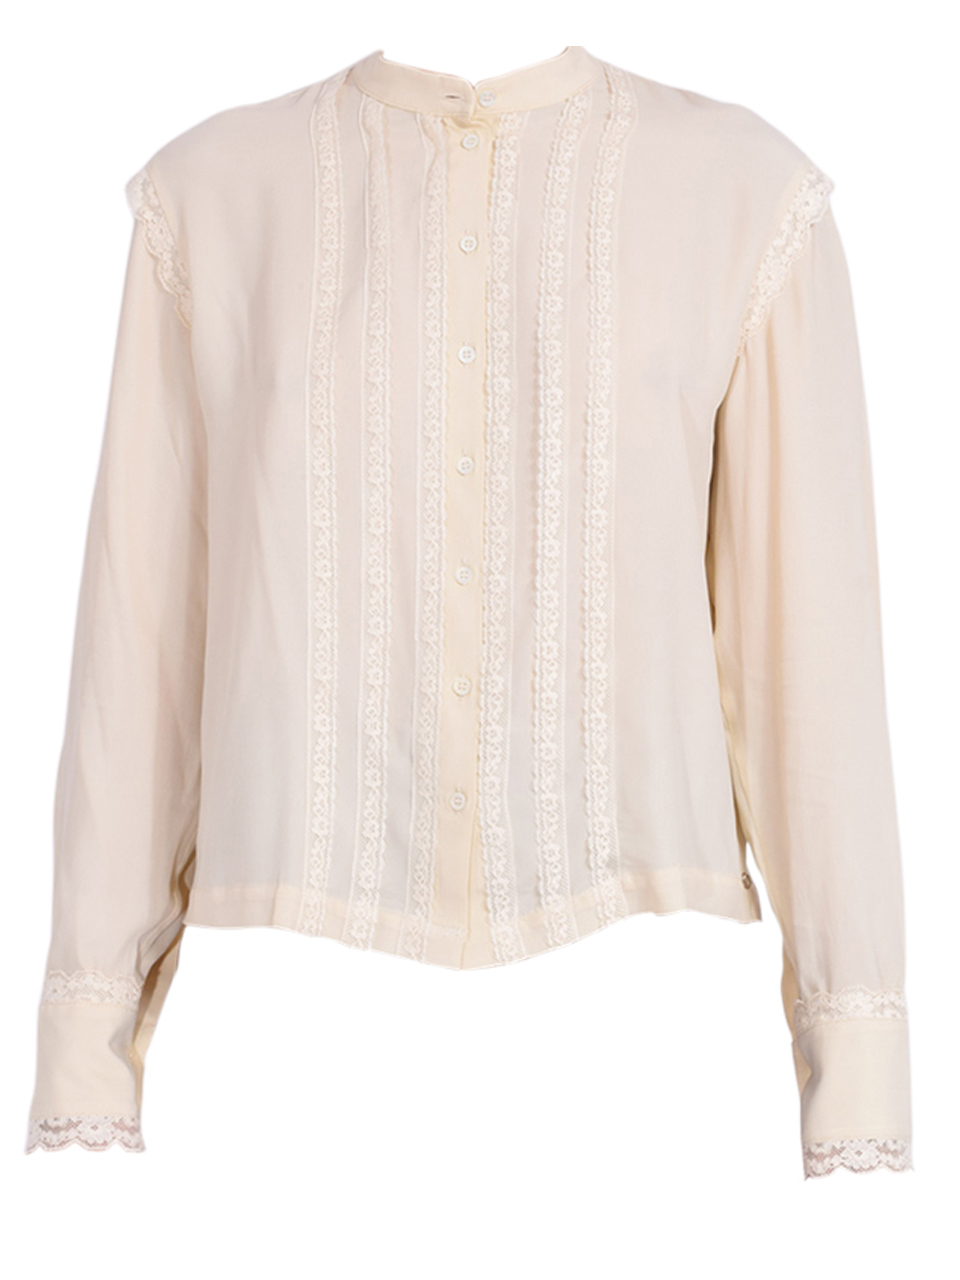 Ottod'Ame Silk Blend Shirt in Off-White Product Shot 